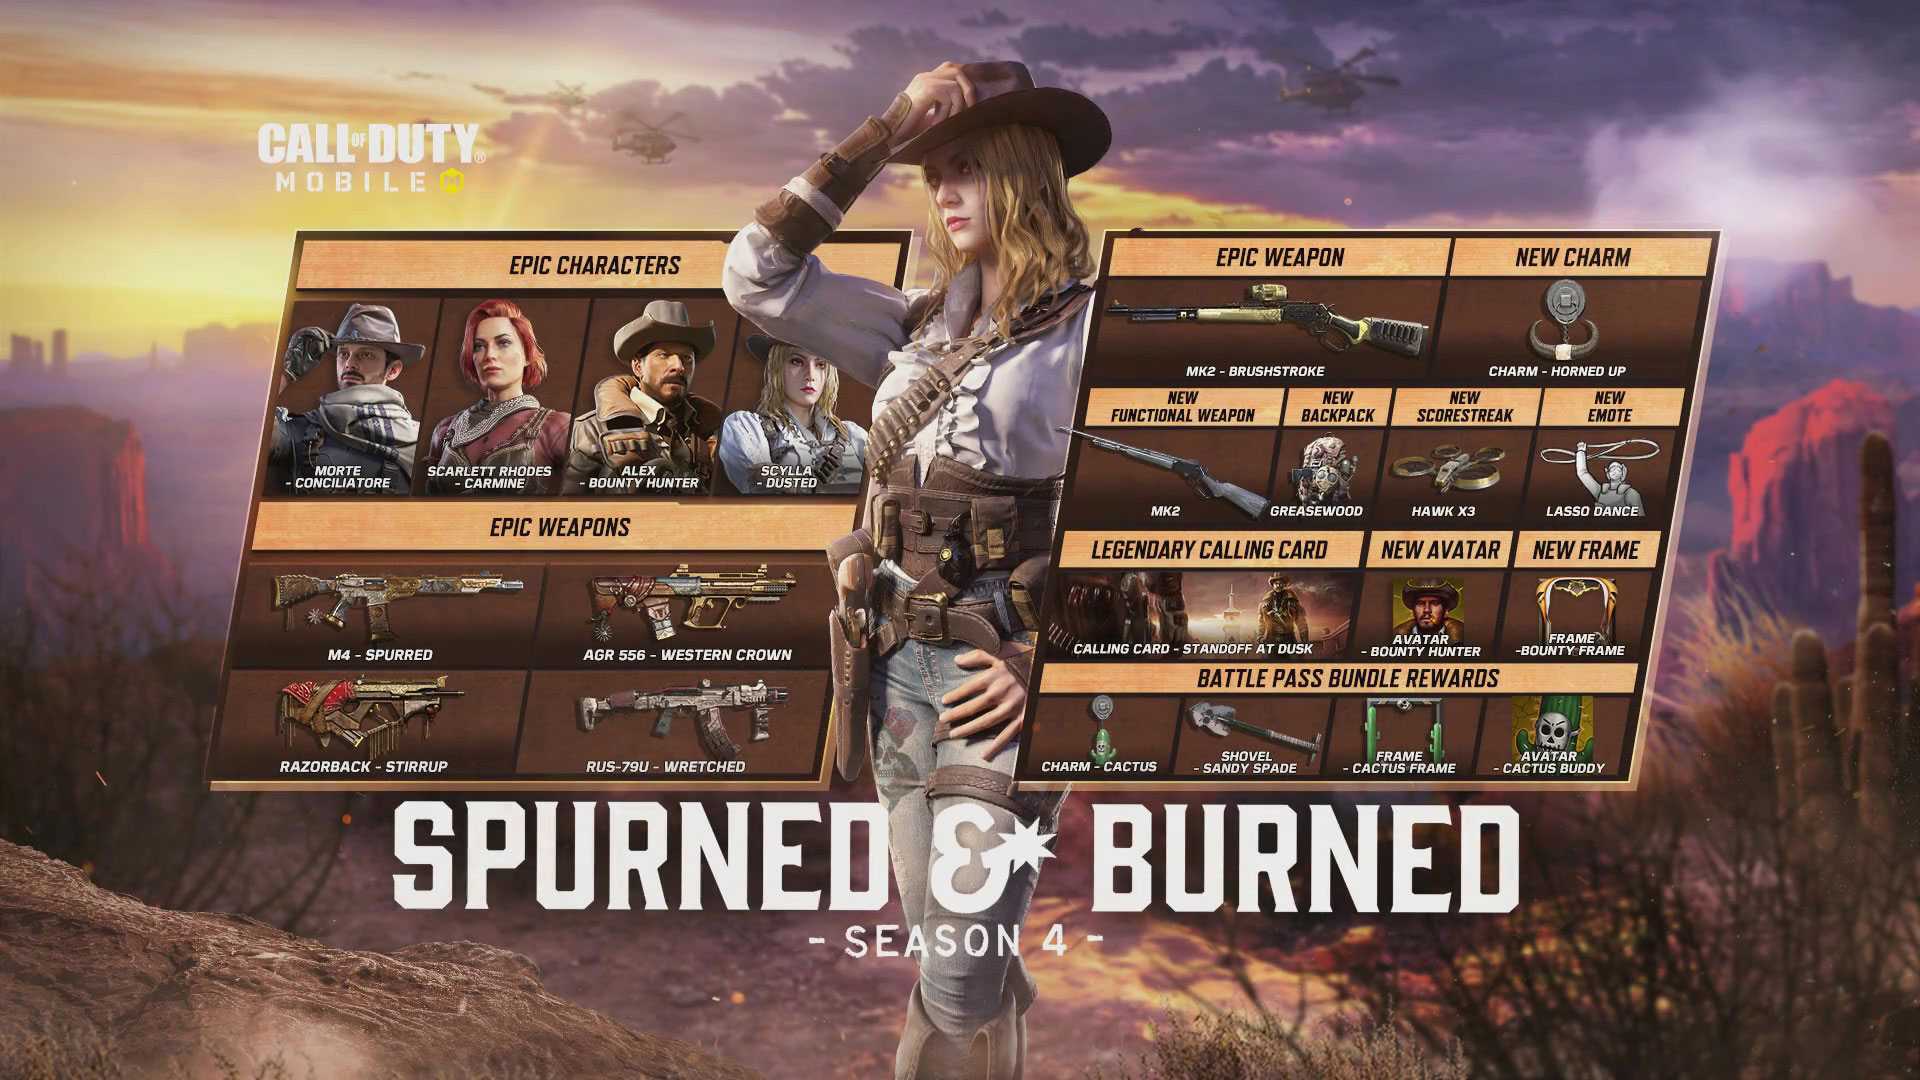 Announcement to the Wild West in Spurned & Burned, Season 4 of